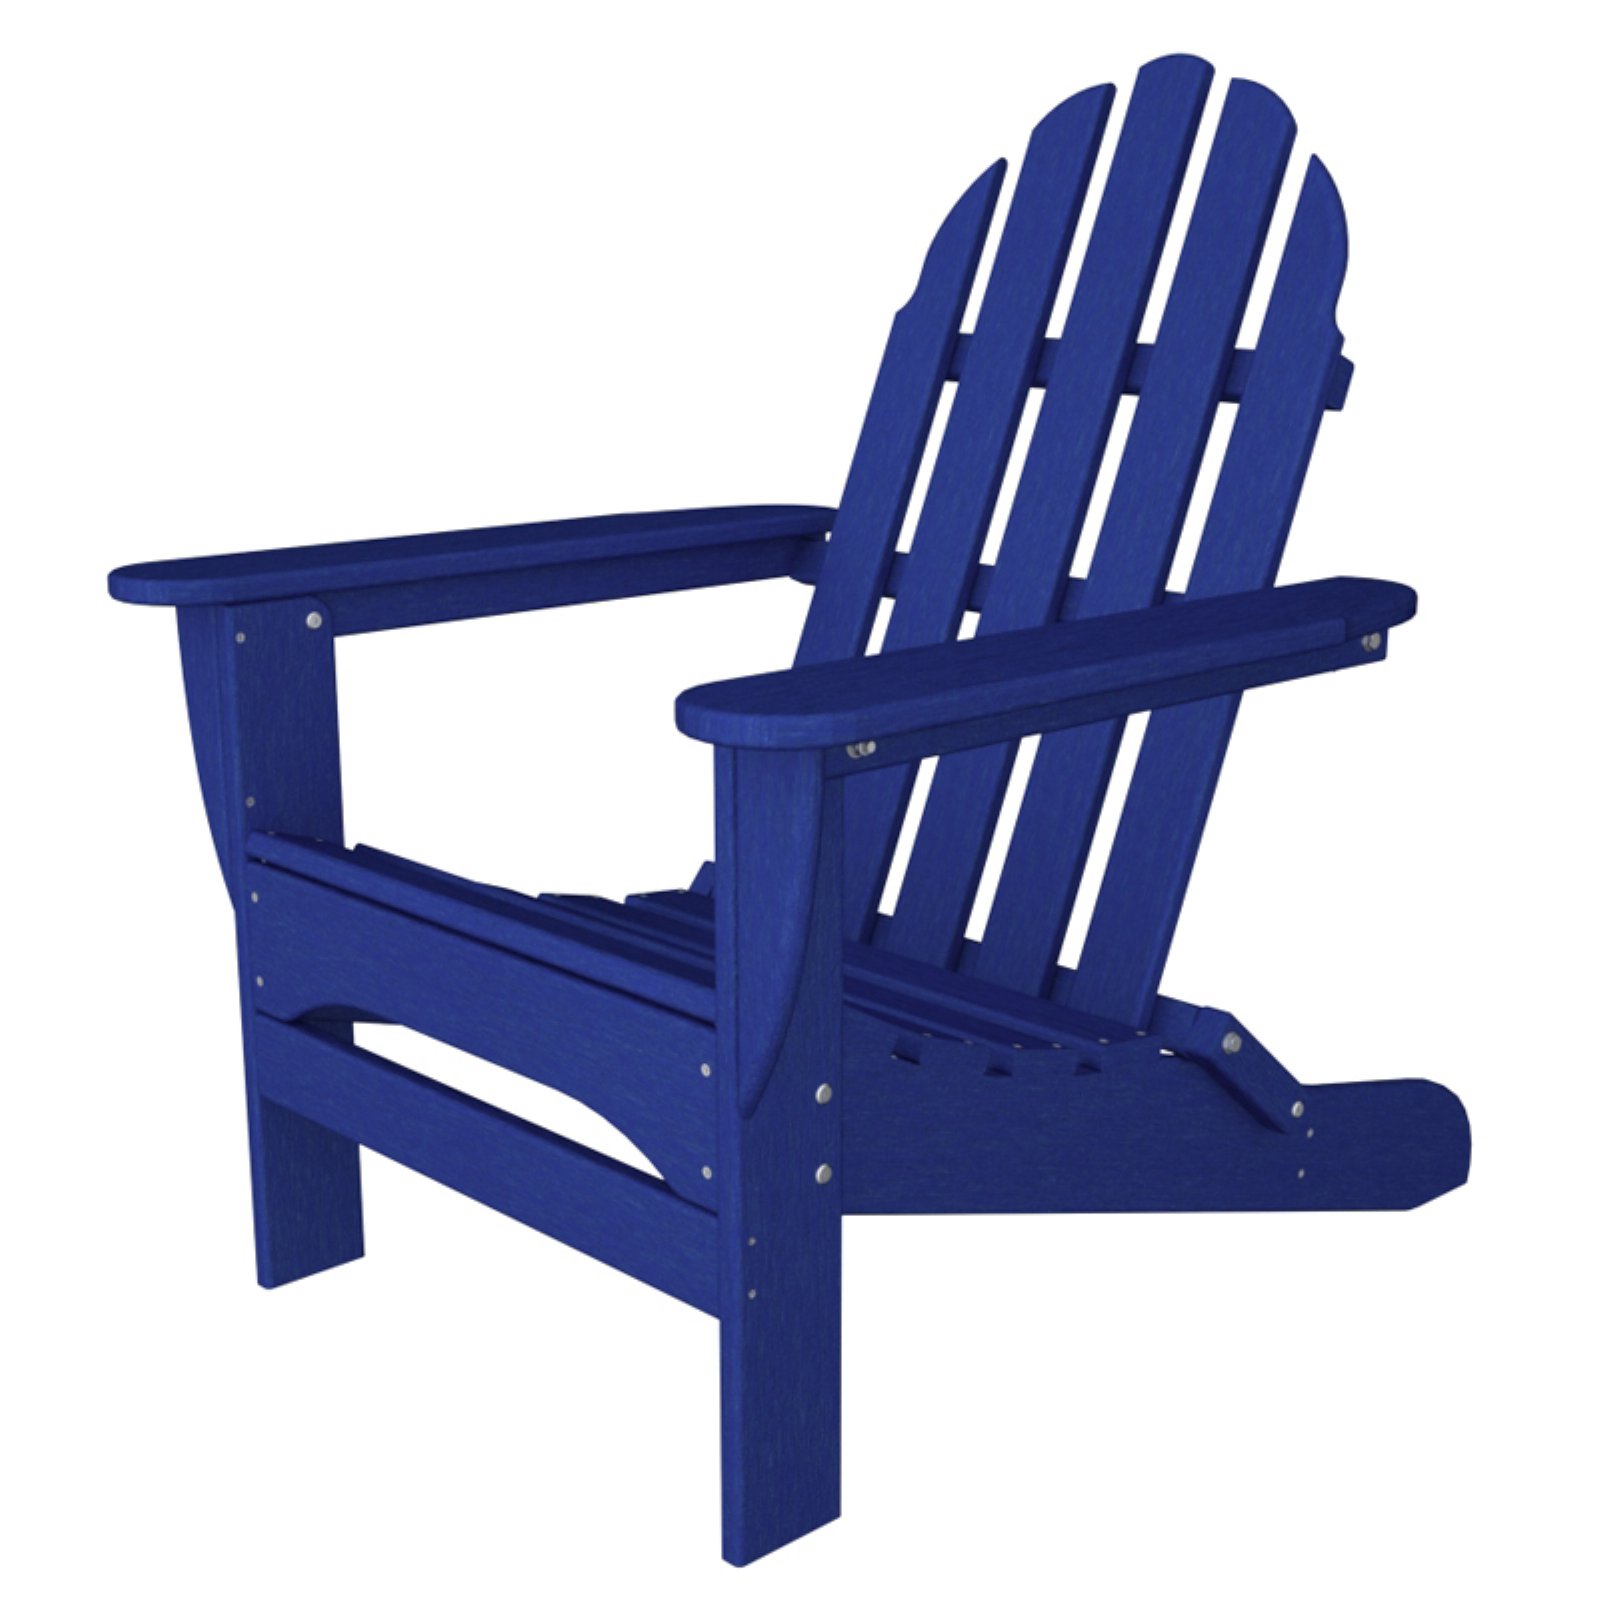 POLYWOOD&reg; Classic Recycled Plastic Foldable Adirondack Chair - image 1 of 11